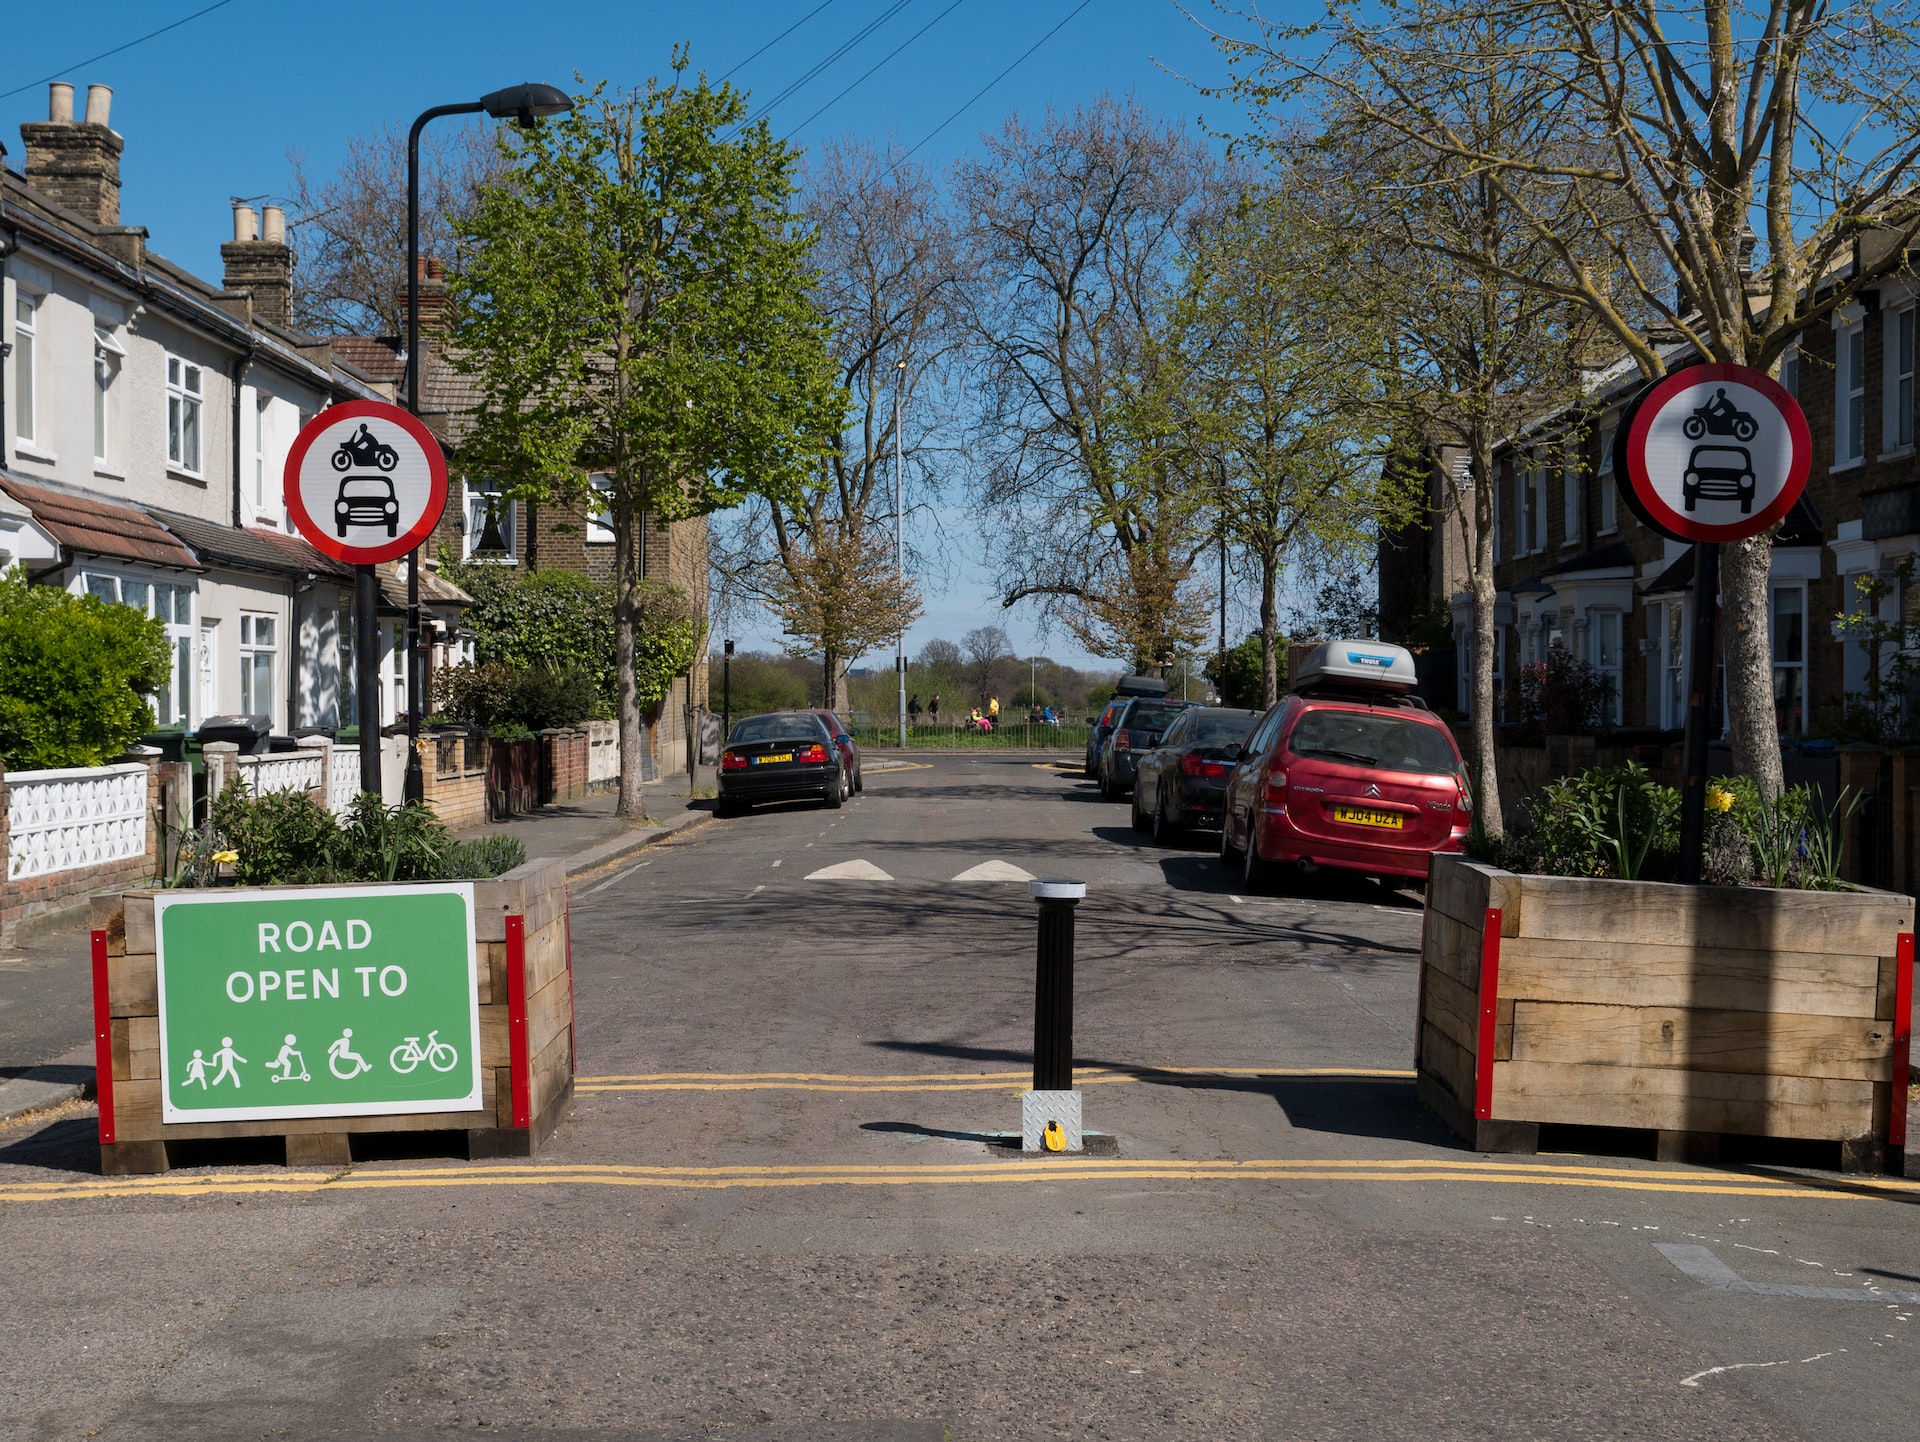 Low traffic neighbourhood schemes cut congestion and pollution on nearby streets